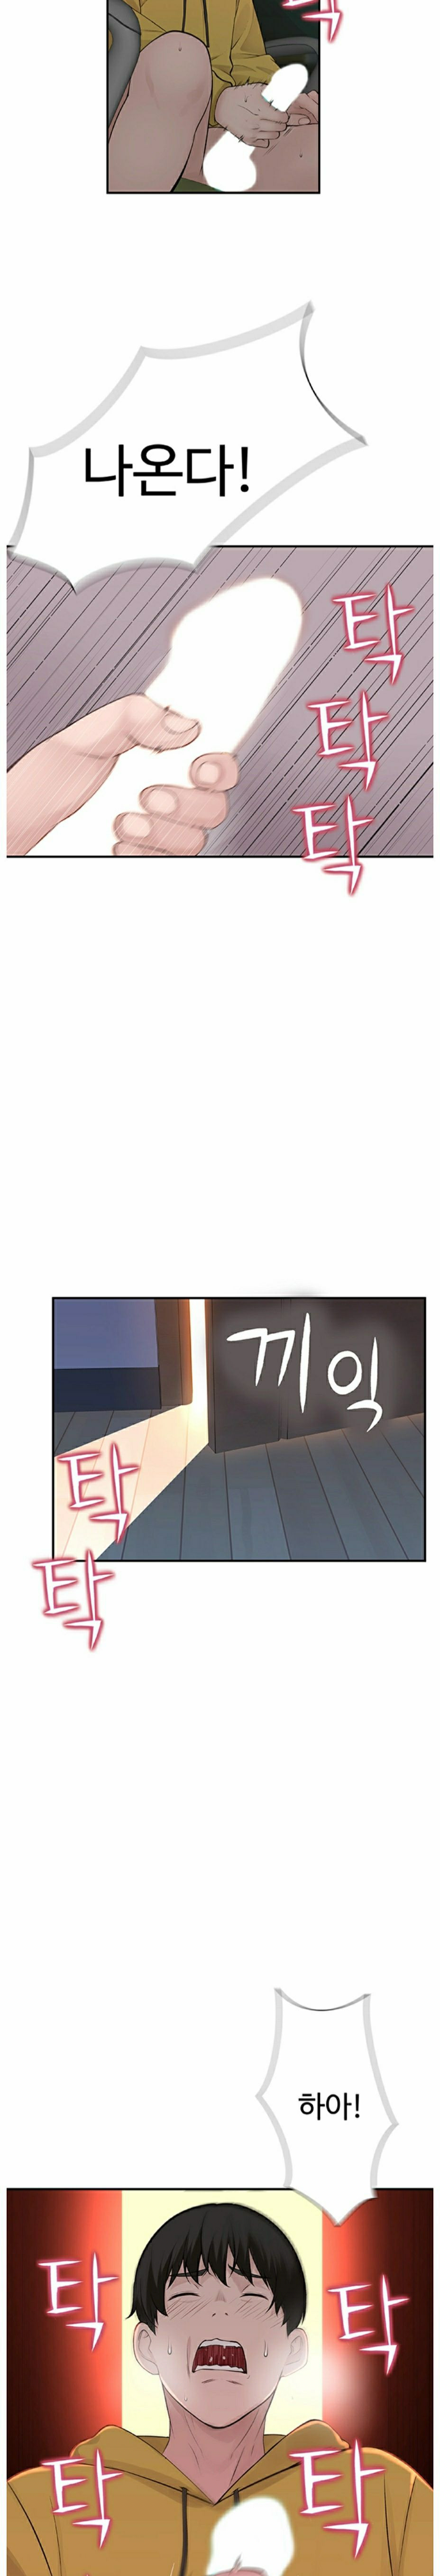 Between Us Raw - Chapter 1 Page 22